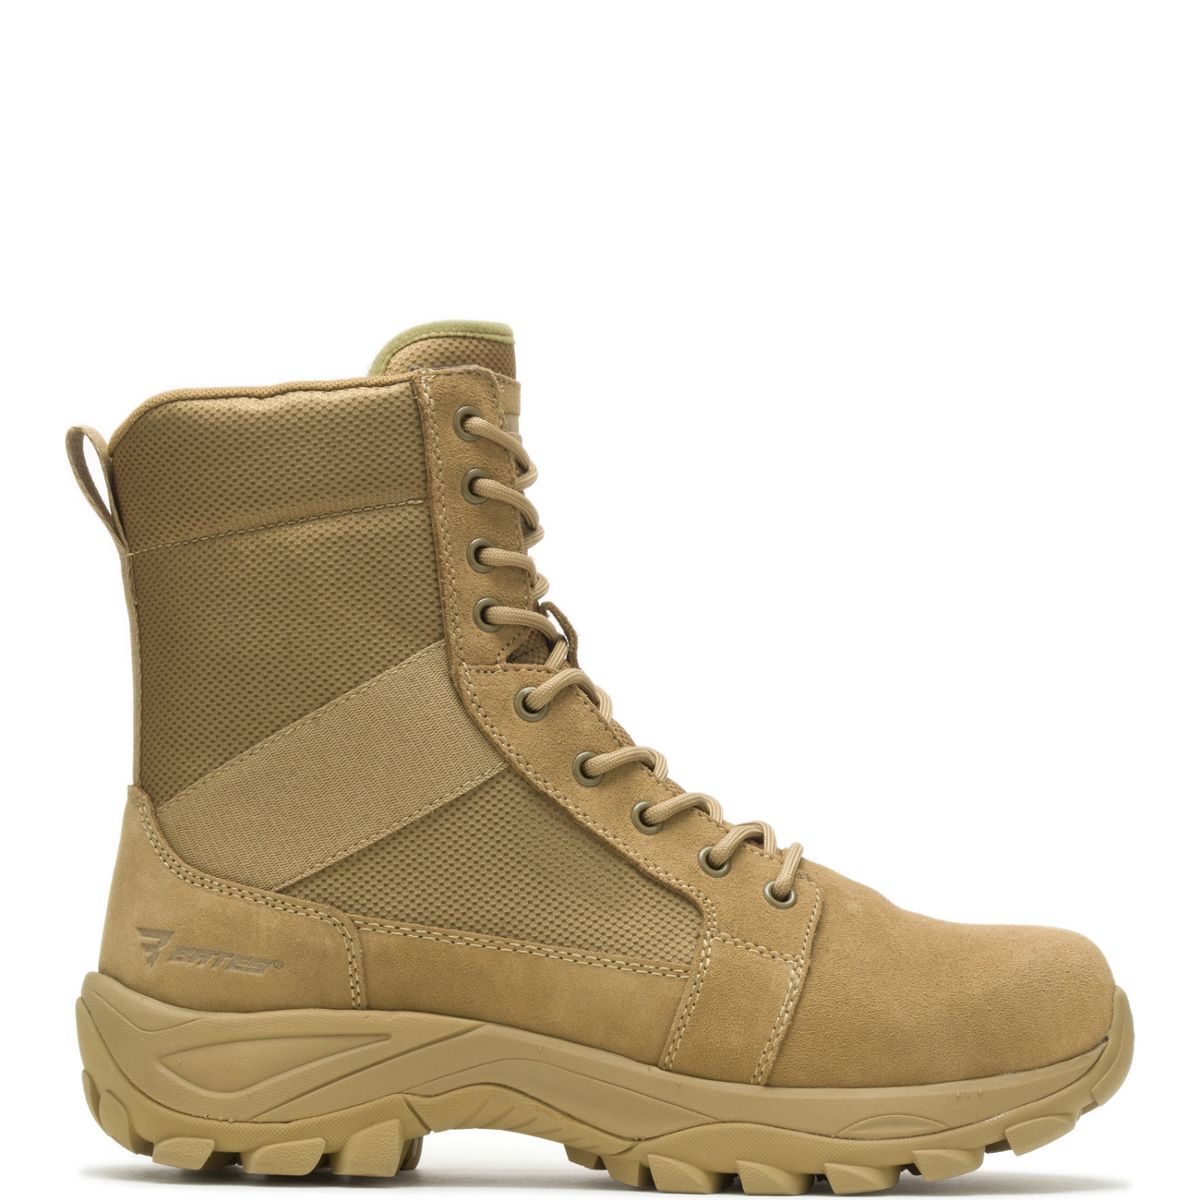 Bates Boots - Tactical, Military & Security Footwear